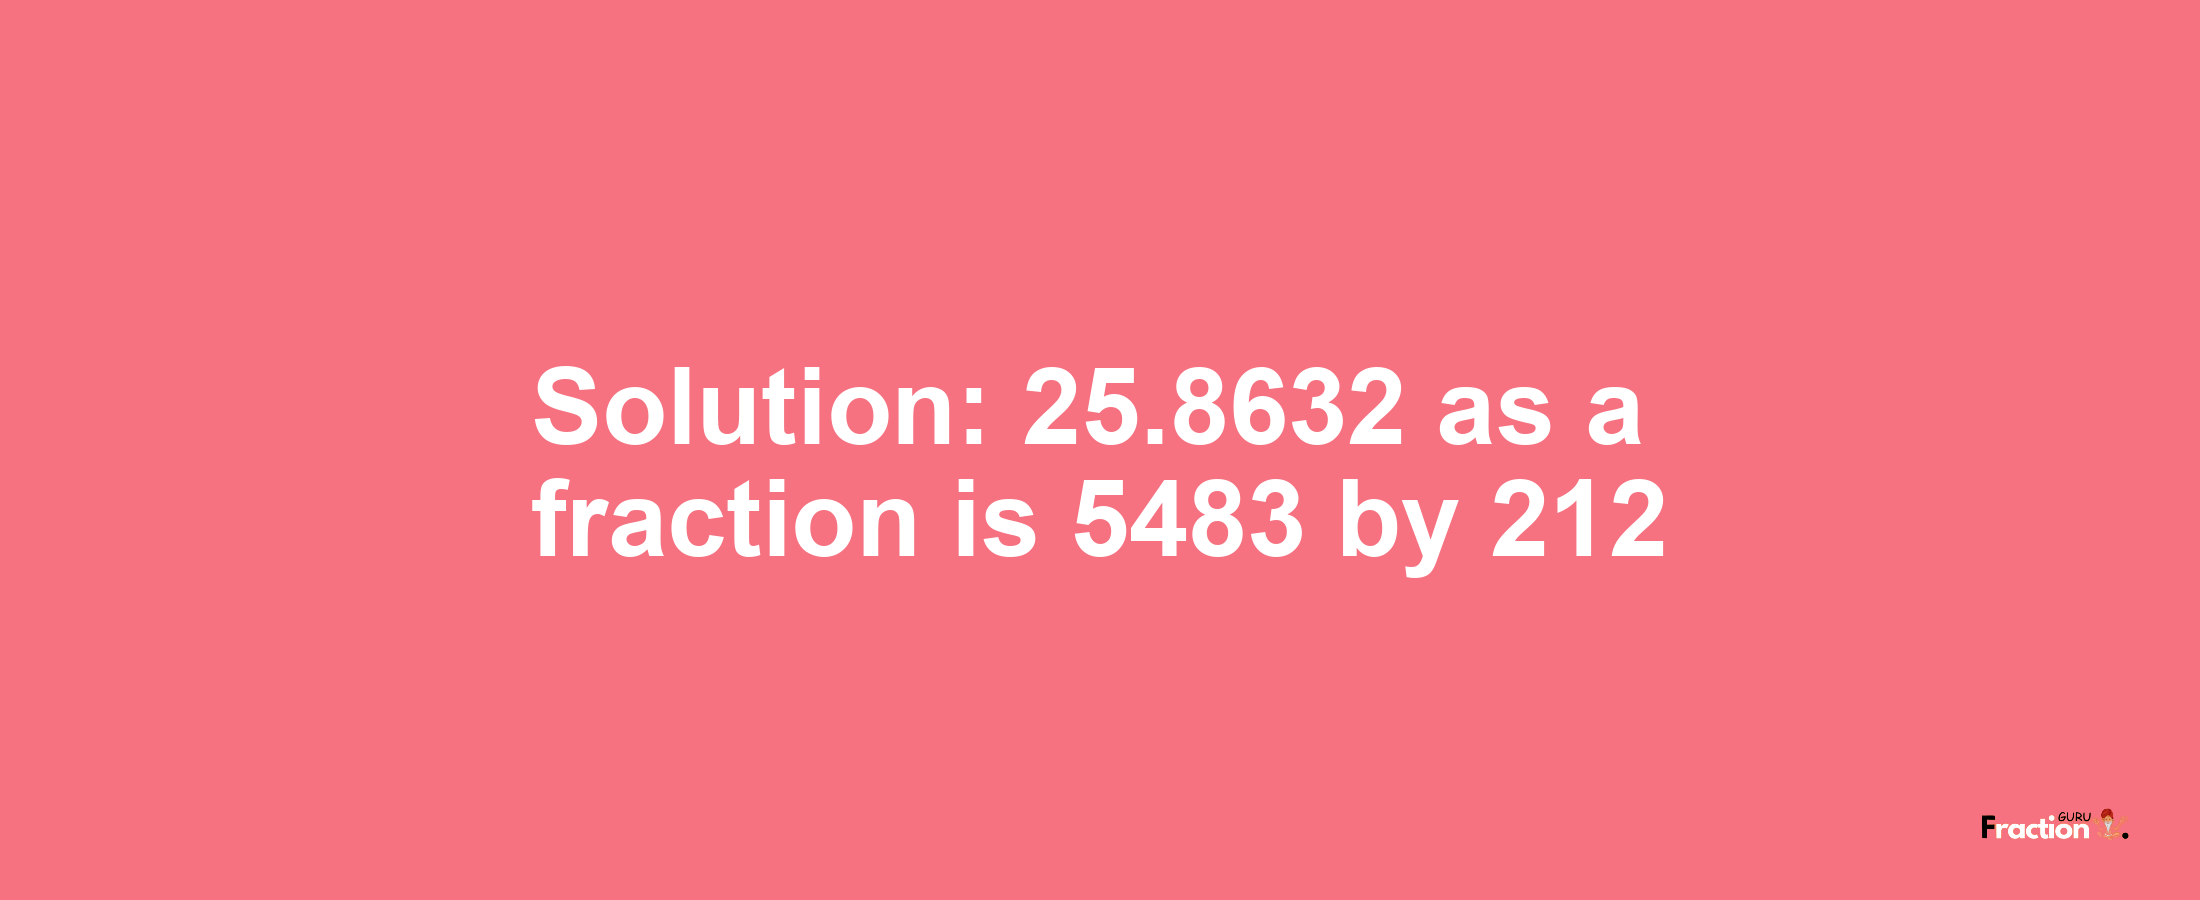 Solution:25.8632 as a fraction is 5483/212